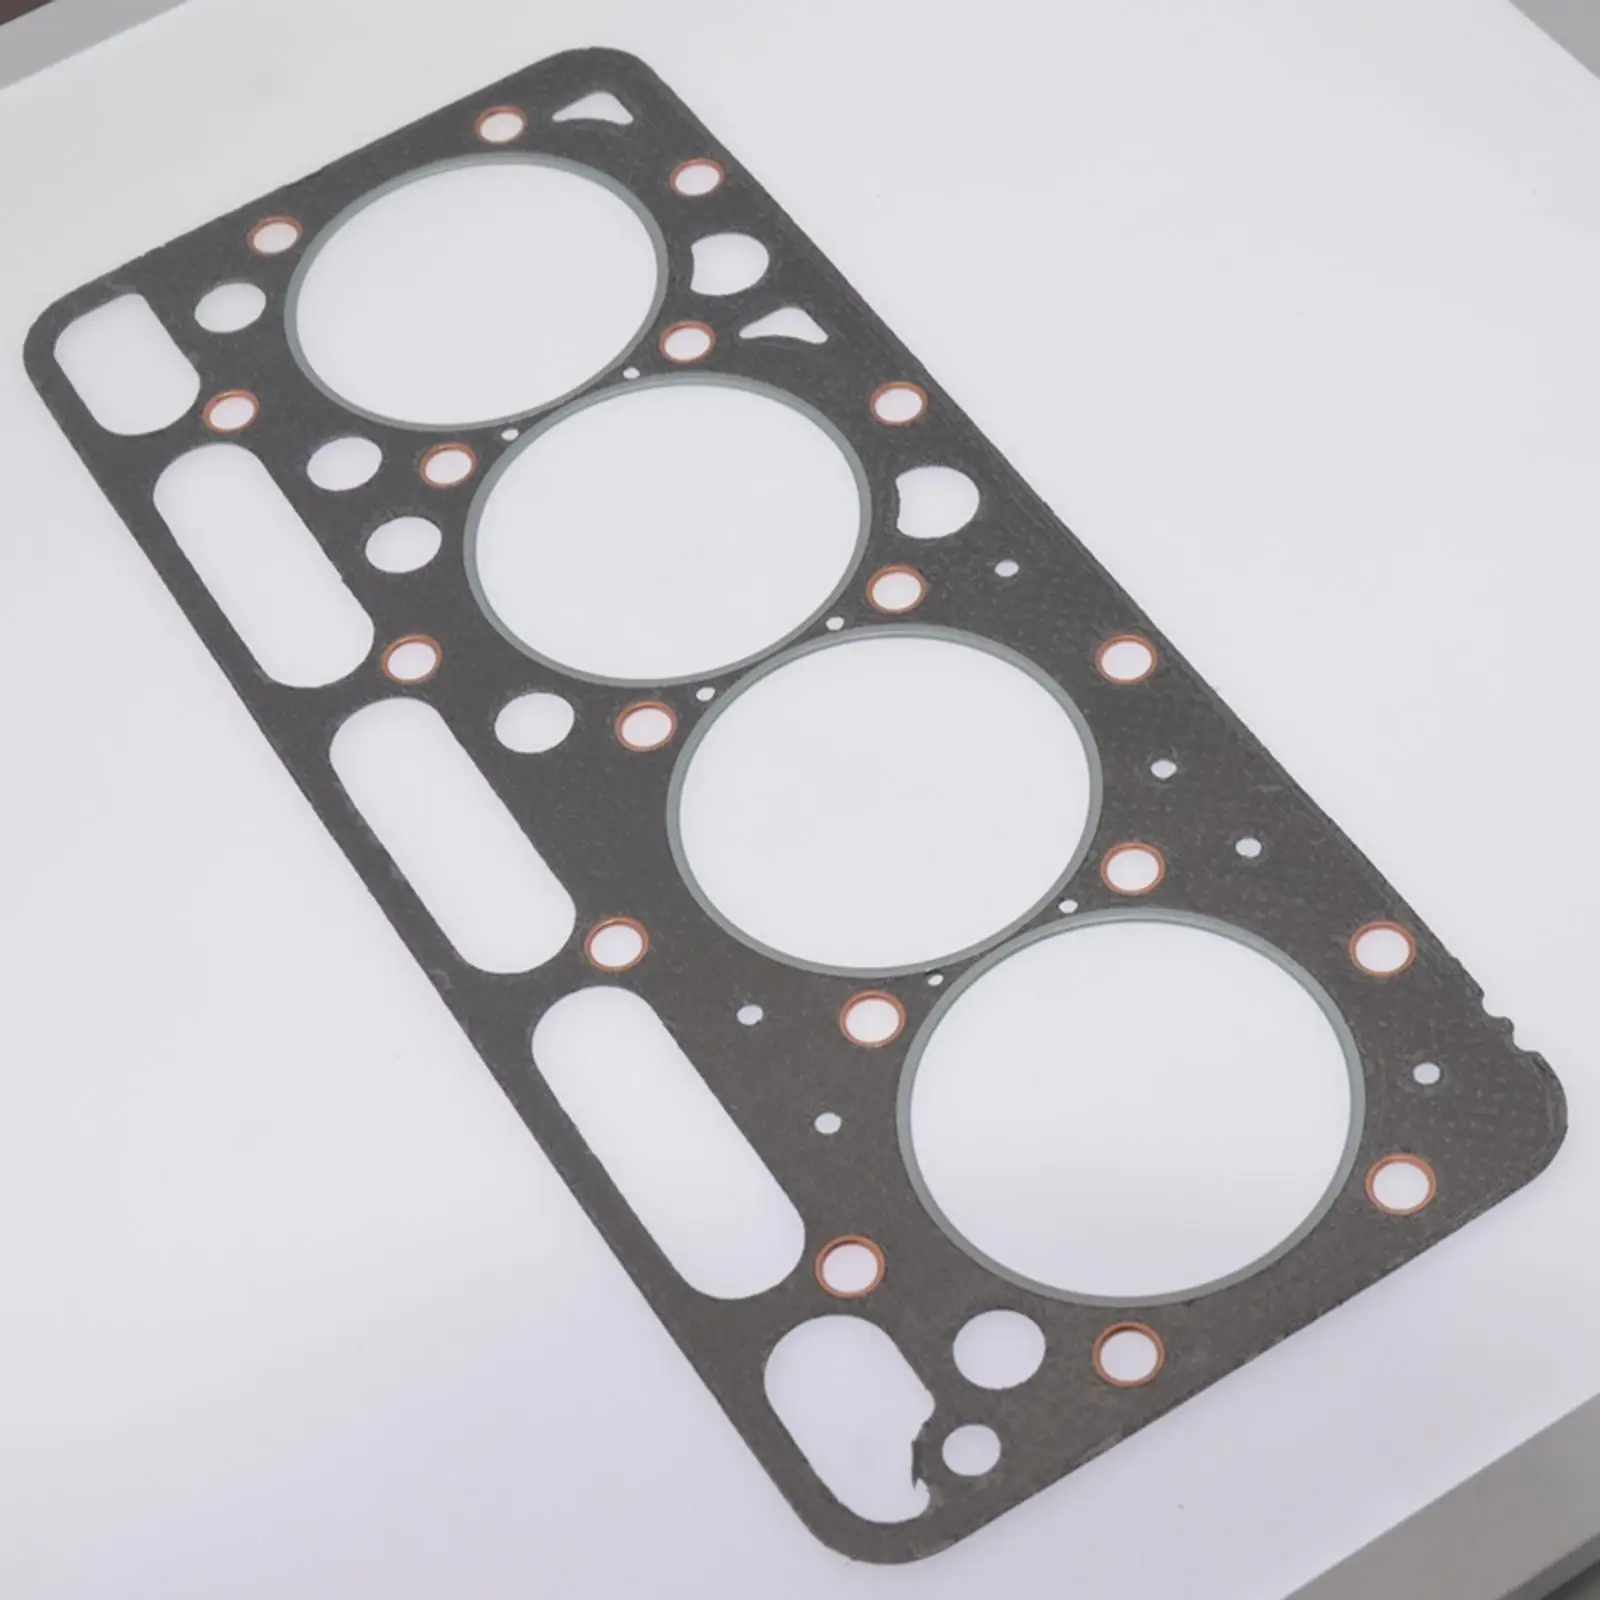 Cylinder Head Gasket Accessory Replaces Premium Easy to Install Composite Metal Parts Professional for Kubota Bobcat